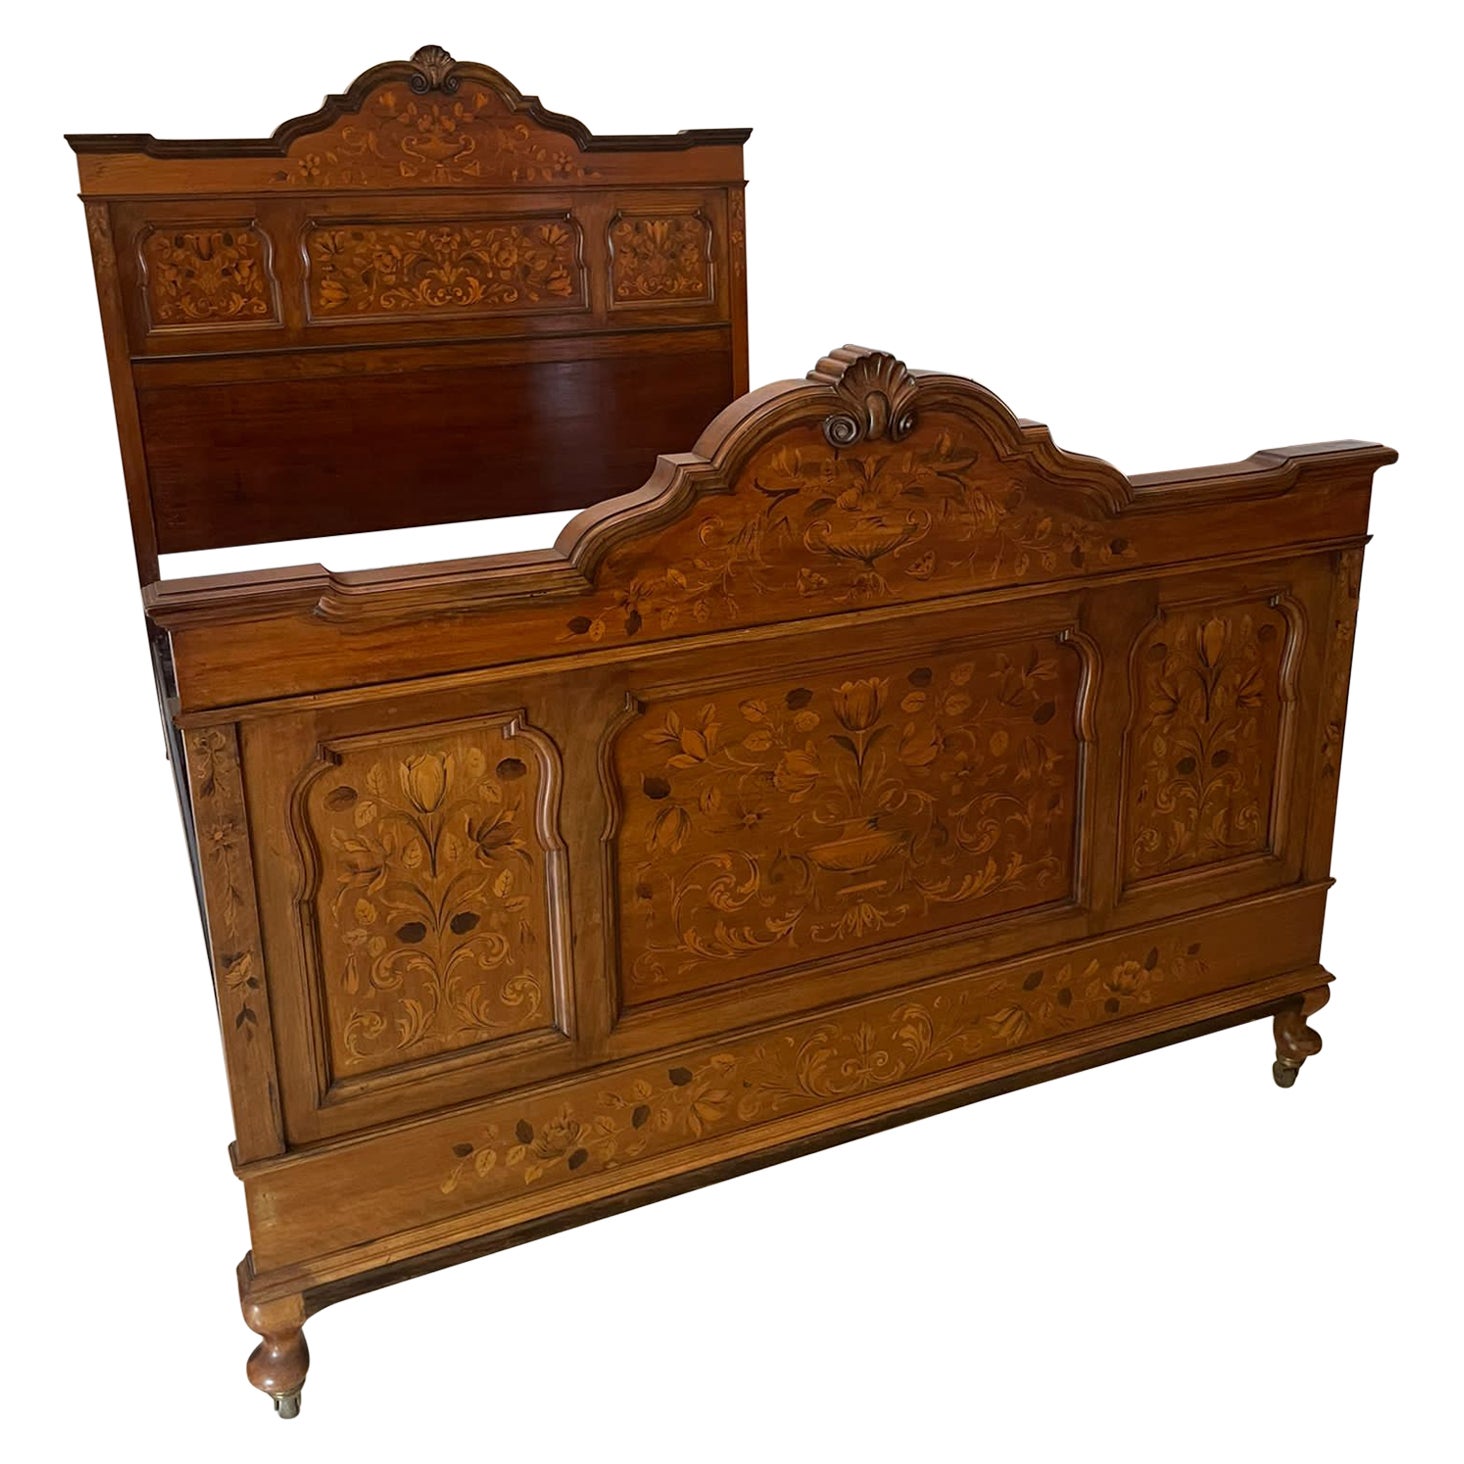 Outstanding Quality King Size Antique Figured Walnut Floral Marquetry Inlaid Bed For Sale